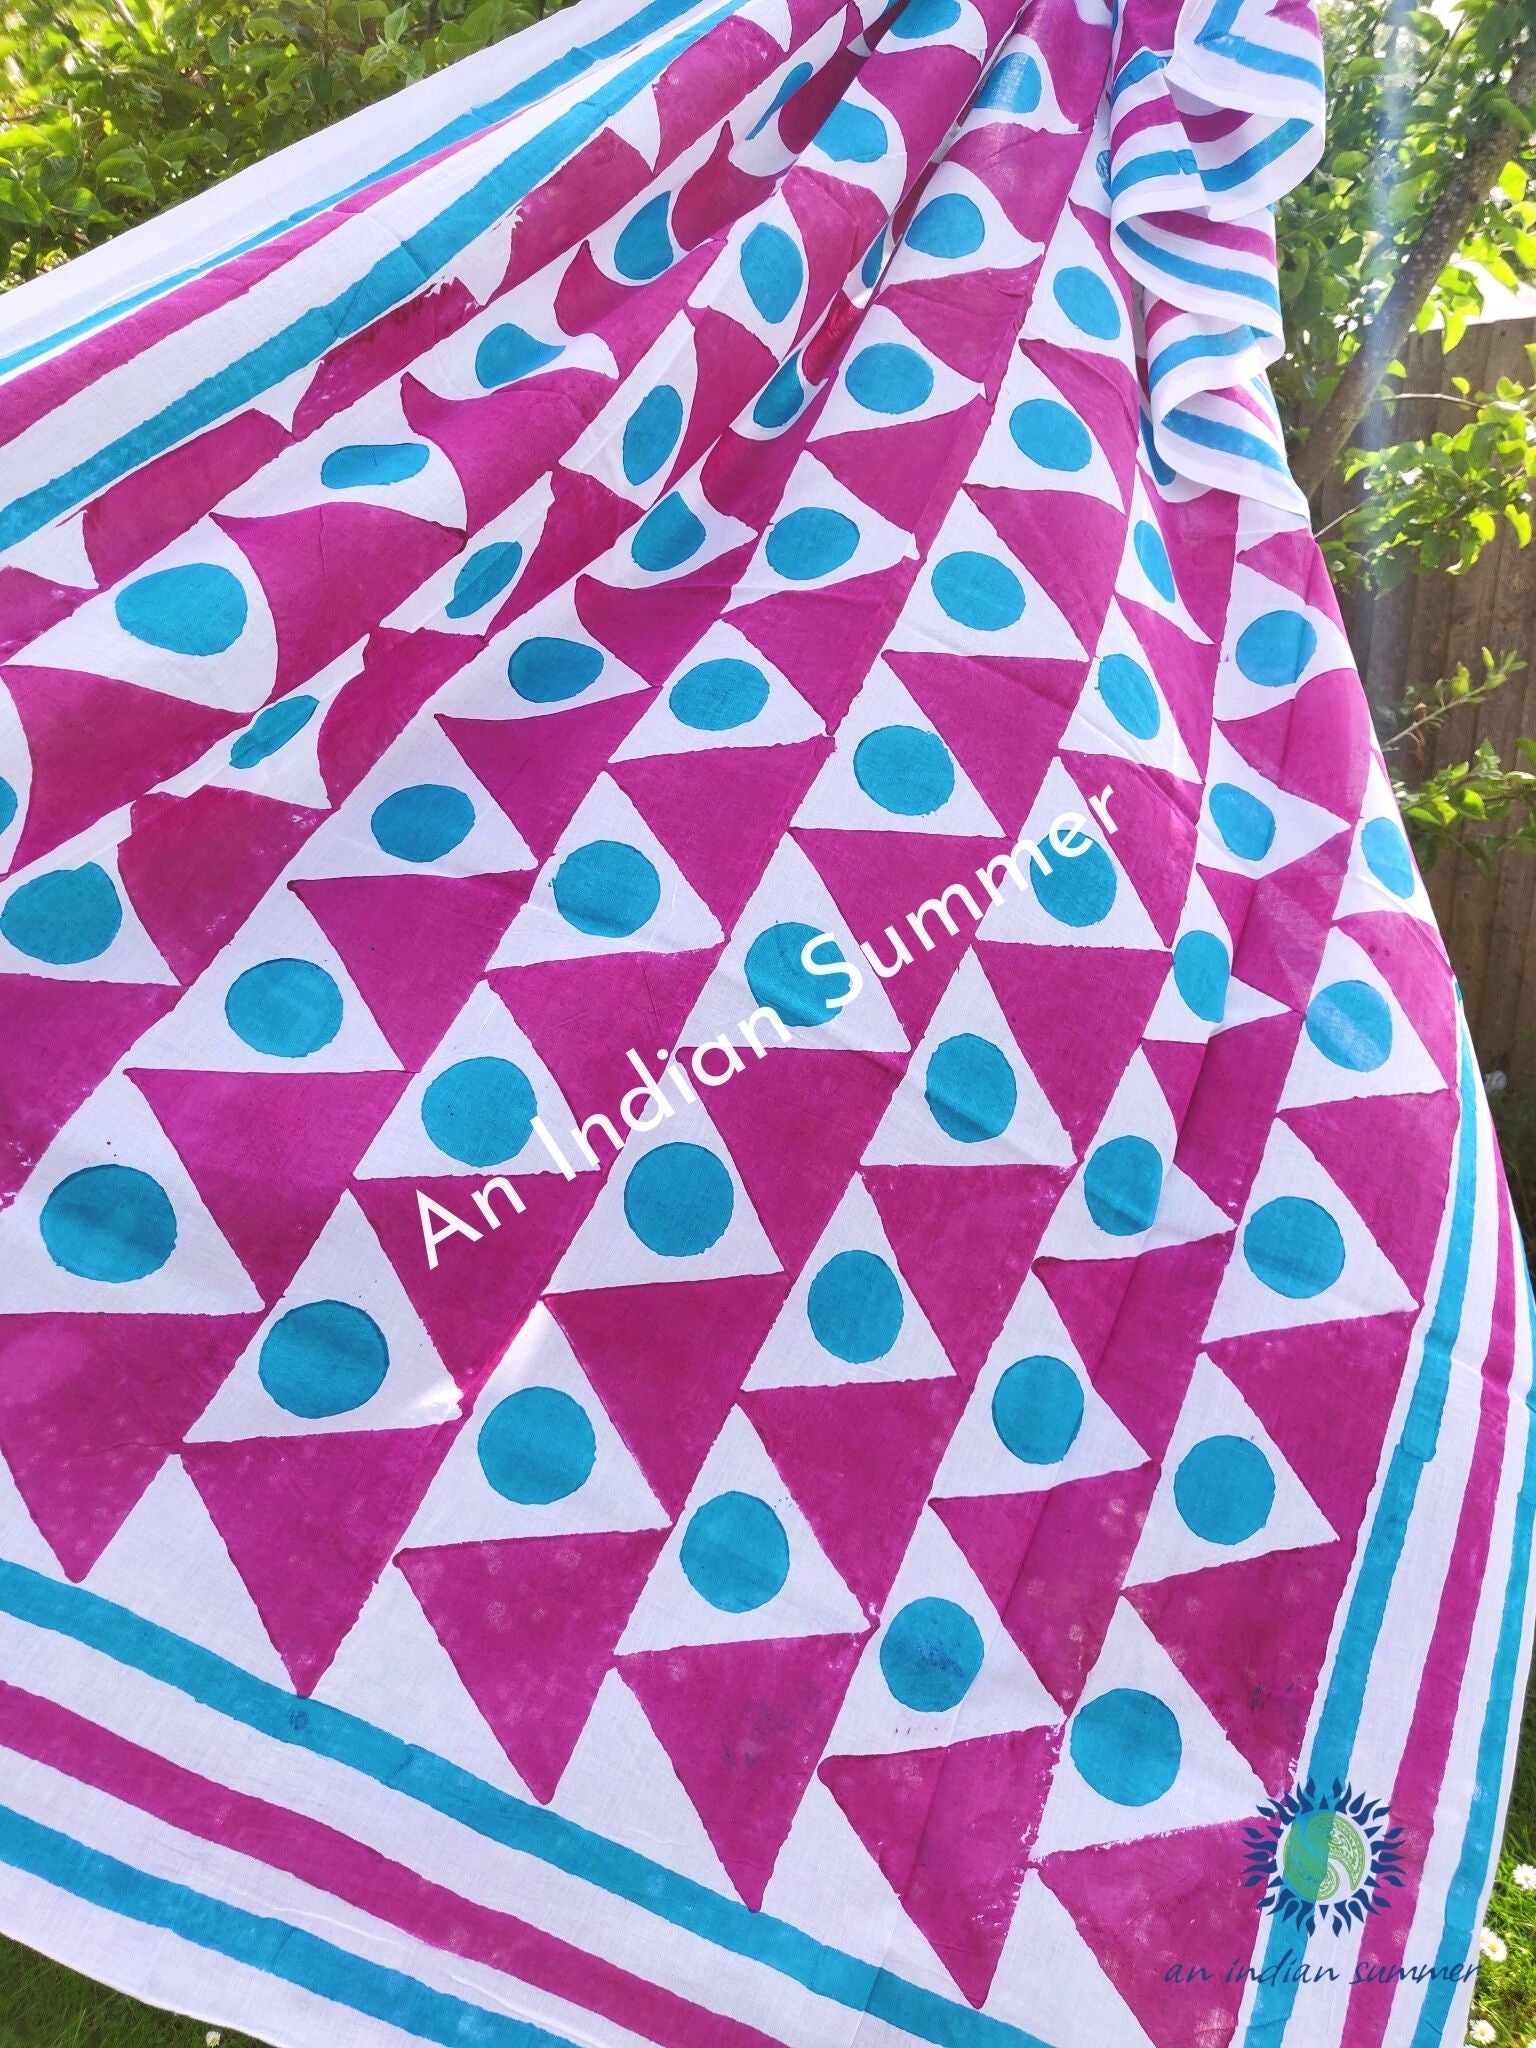 Virtue is Bold Sarong Pareo | Magenta & Teal | Hand Block Printed | Soft Cotton Voile | An Indian Summer | Seasonless Timeless Sustainable Ethical Authentic Artisan Conscious Clothing Lifestyle Brand